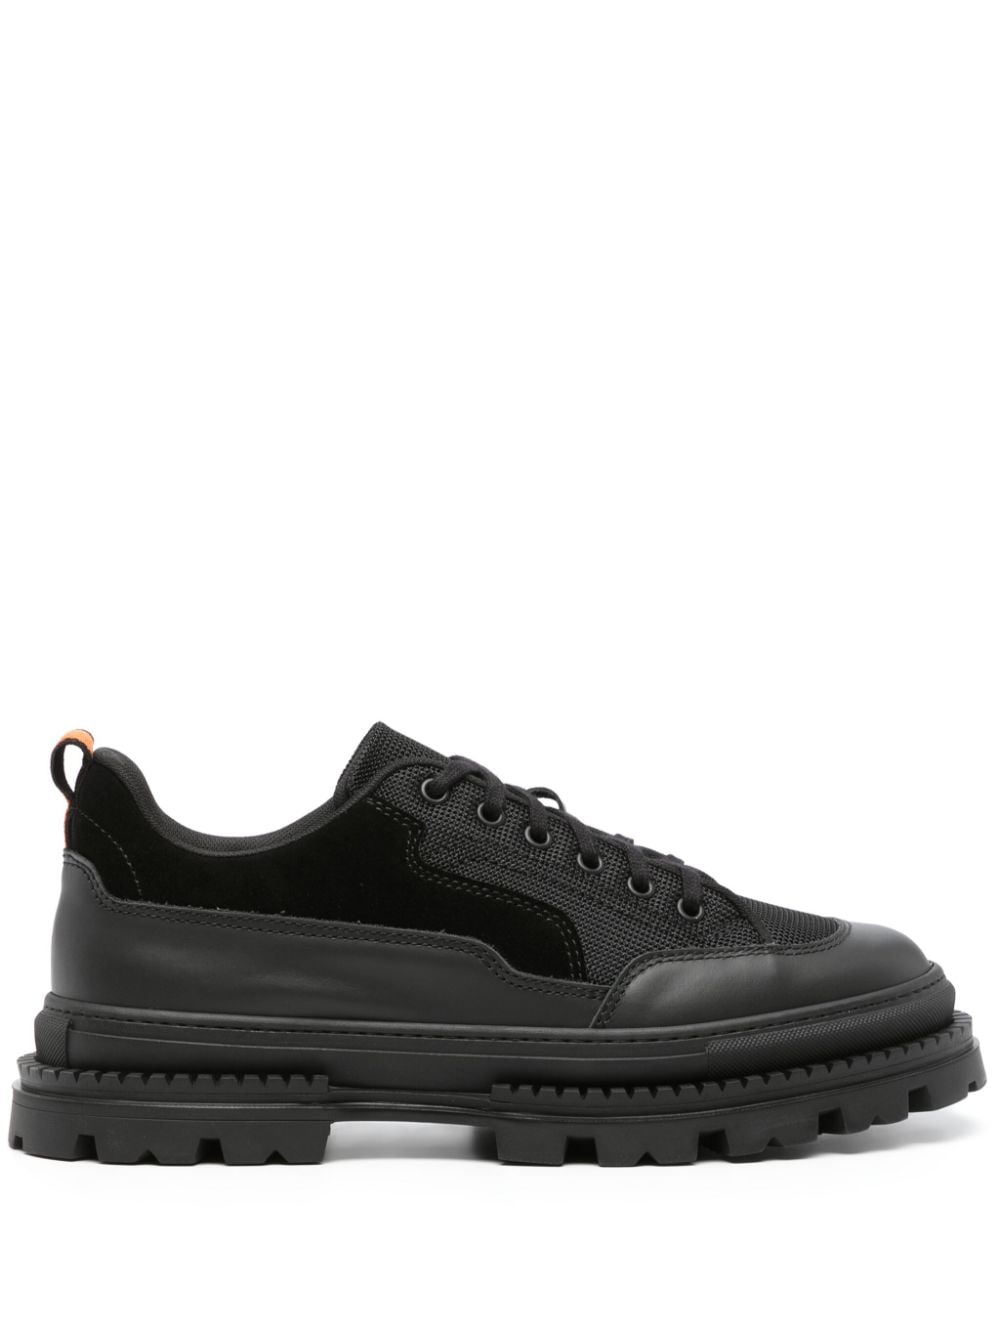 Henderson Baracco panelled lace-up sneakers - Black von Henderson Baracco